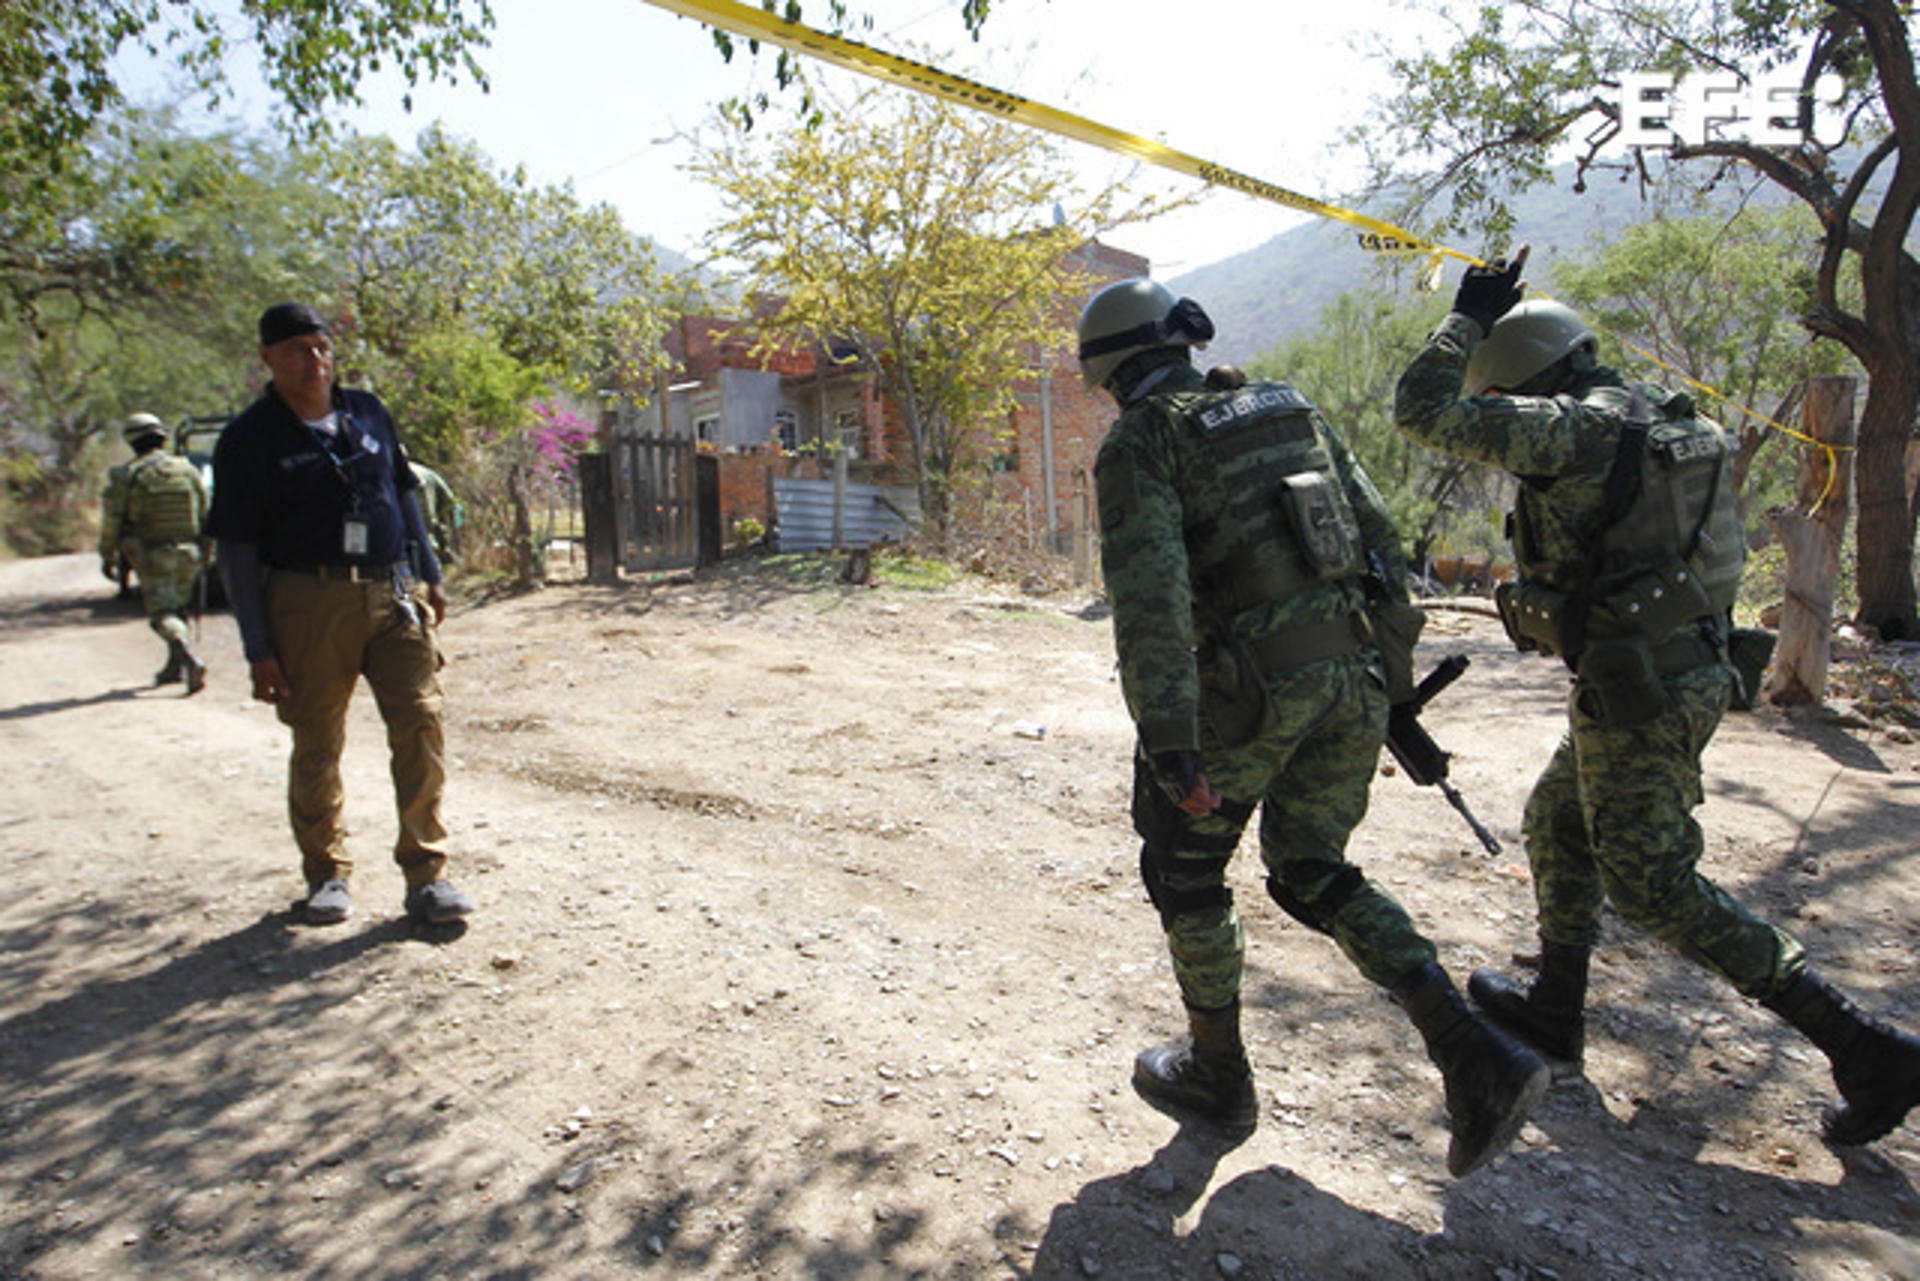 Soldiers help secure the crime scene in Tlajomulco, Mexico, on 12 July 2023, following an attack with explosives that left six police dead and 12 wounded. EFE/Francisco Guasco